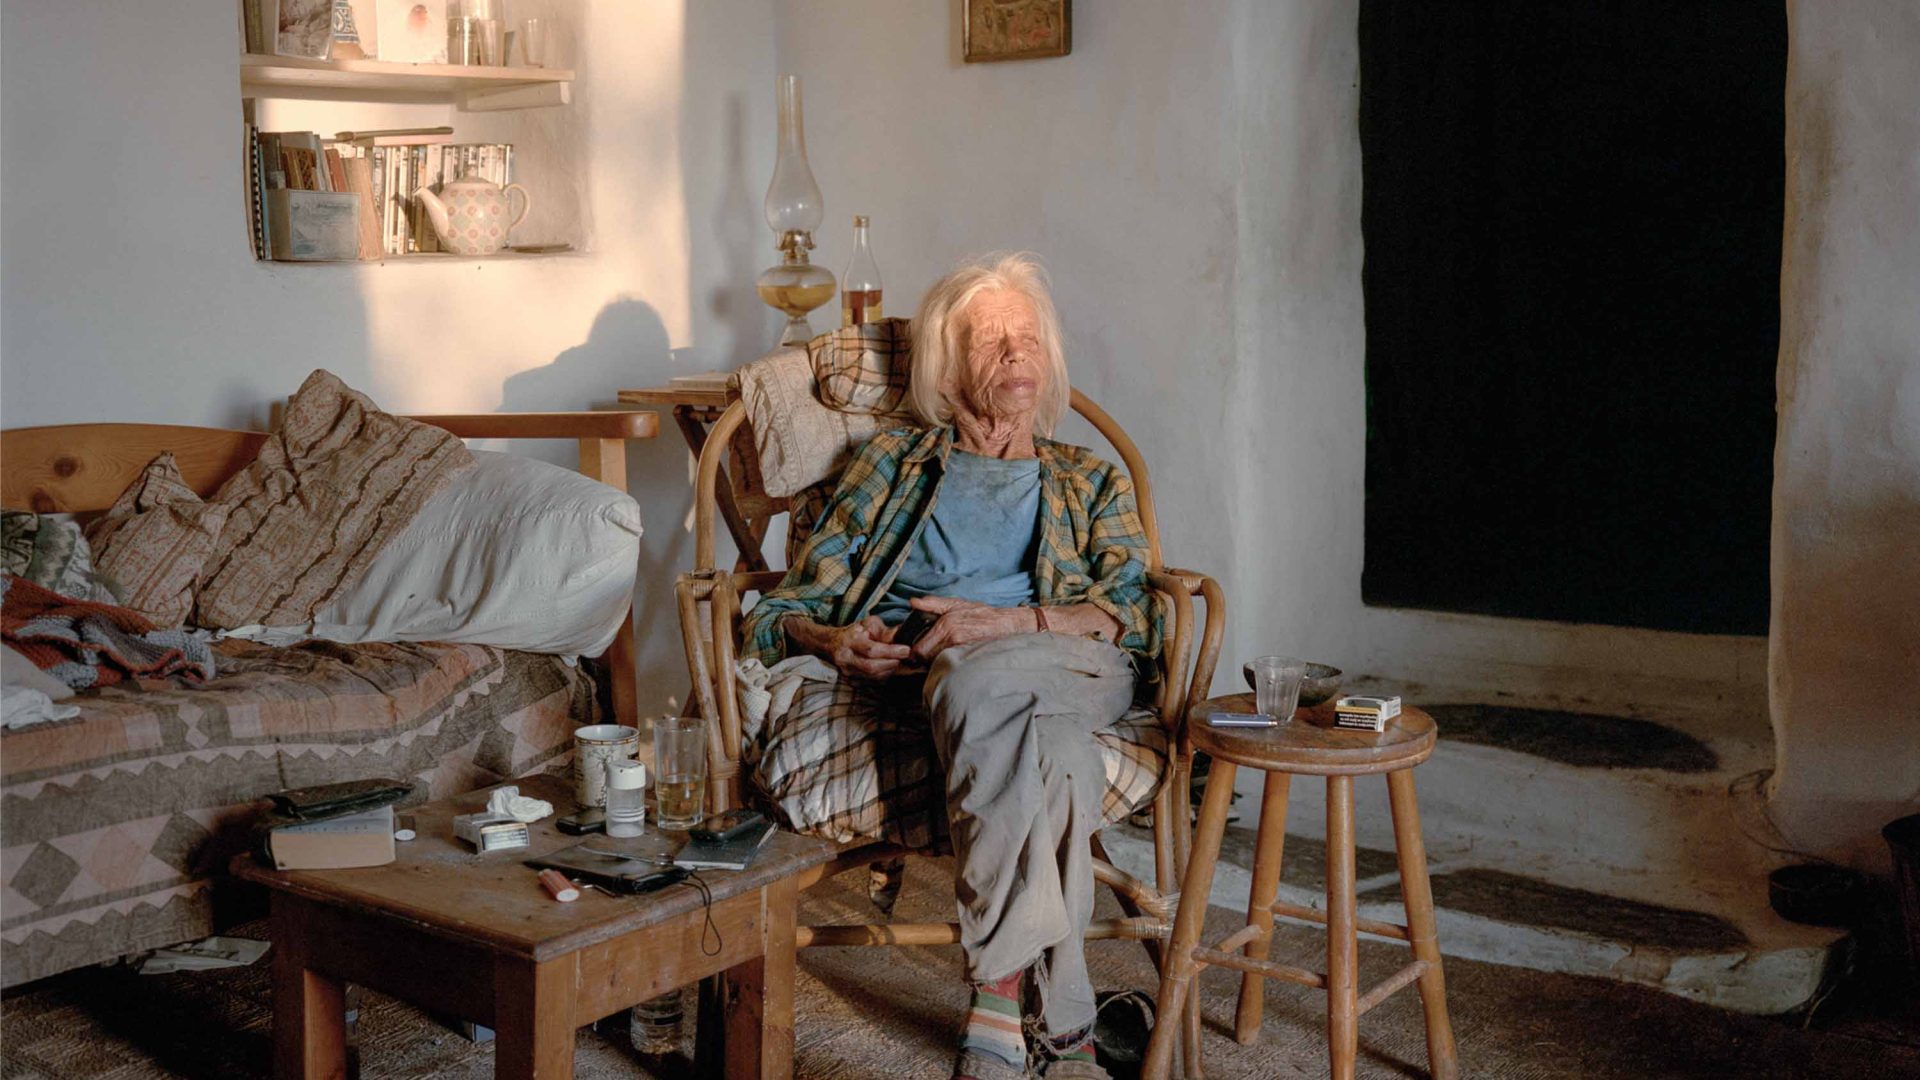 An elderly lady sits in a chair in her home. Soft light falls on her face.